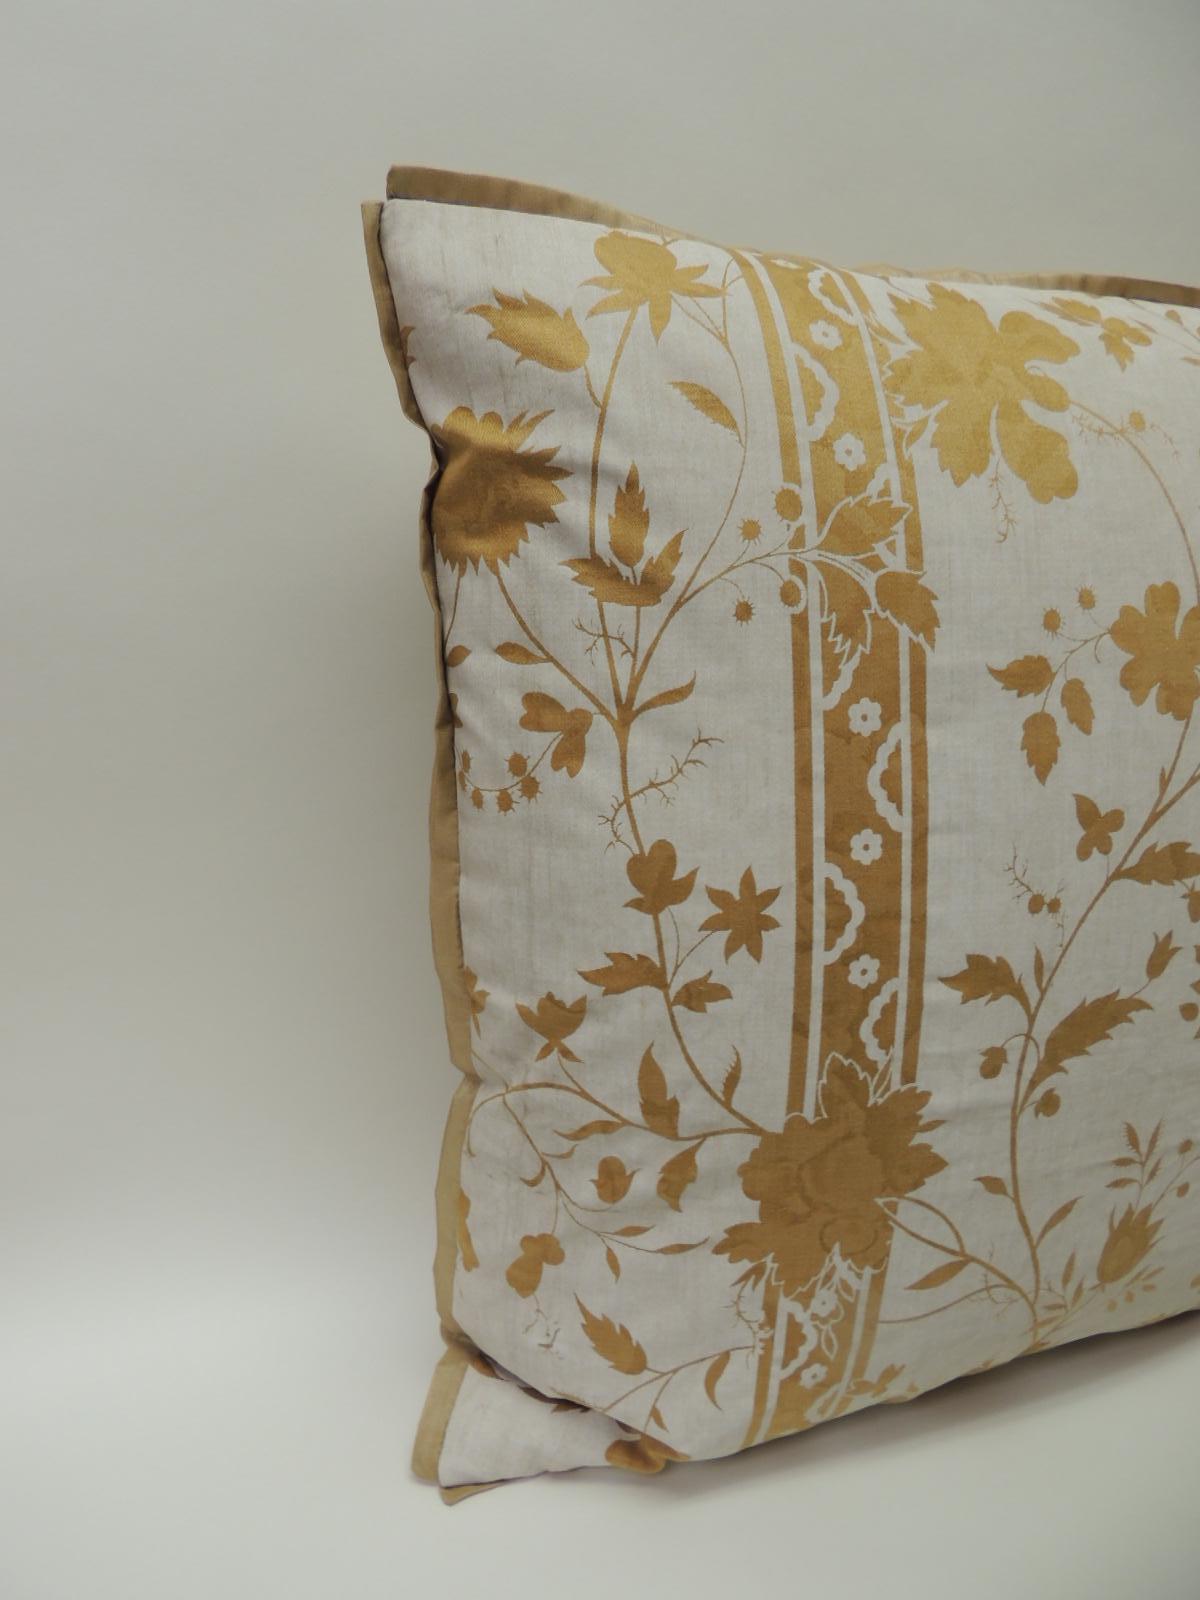 Pair of vintage yellow and natural Fortuny stripes and flowers decorative square pillows. Square decorative pillows embellished with ATG custom flat golden silk trim, same as backings. Decorative square pillows handcrafted and designed in the USA.